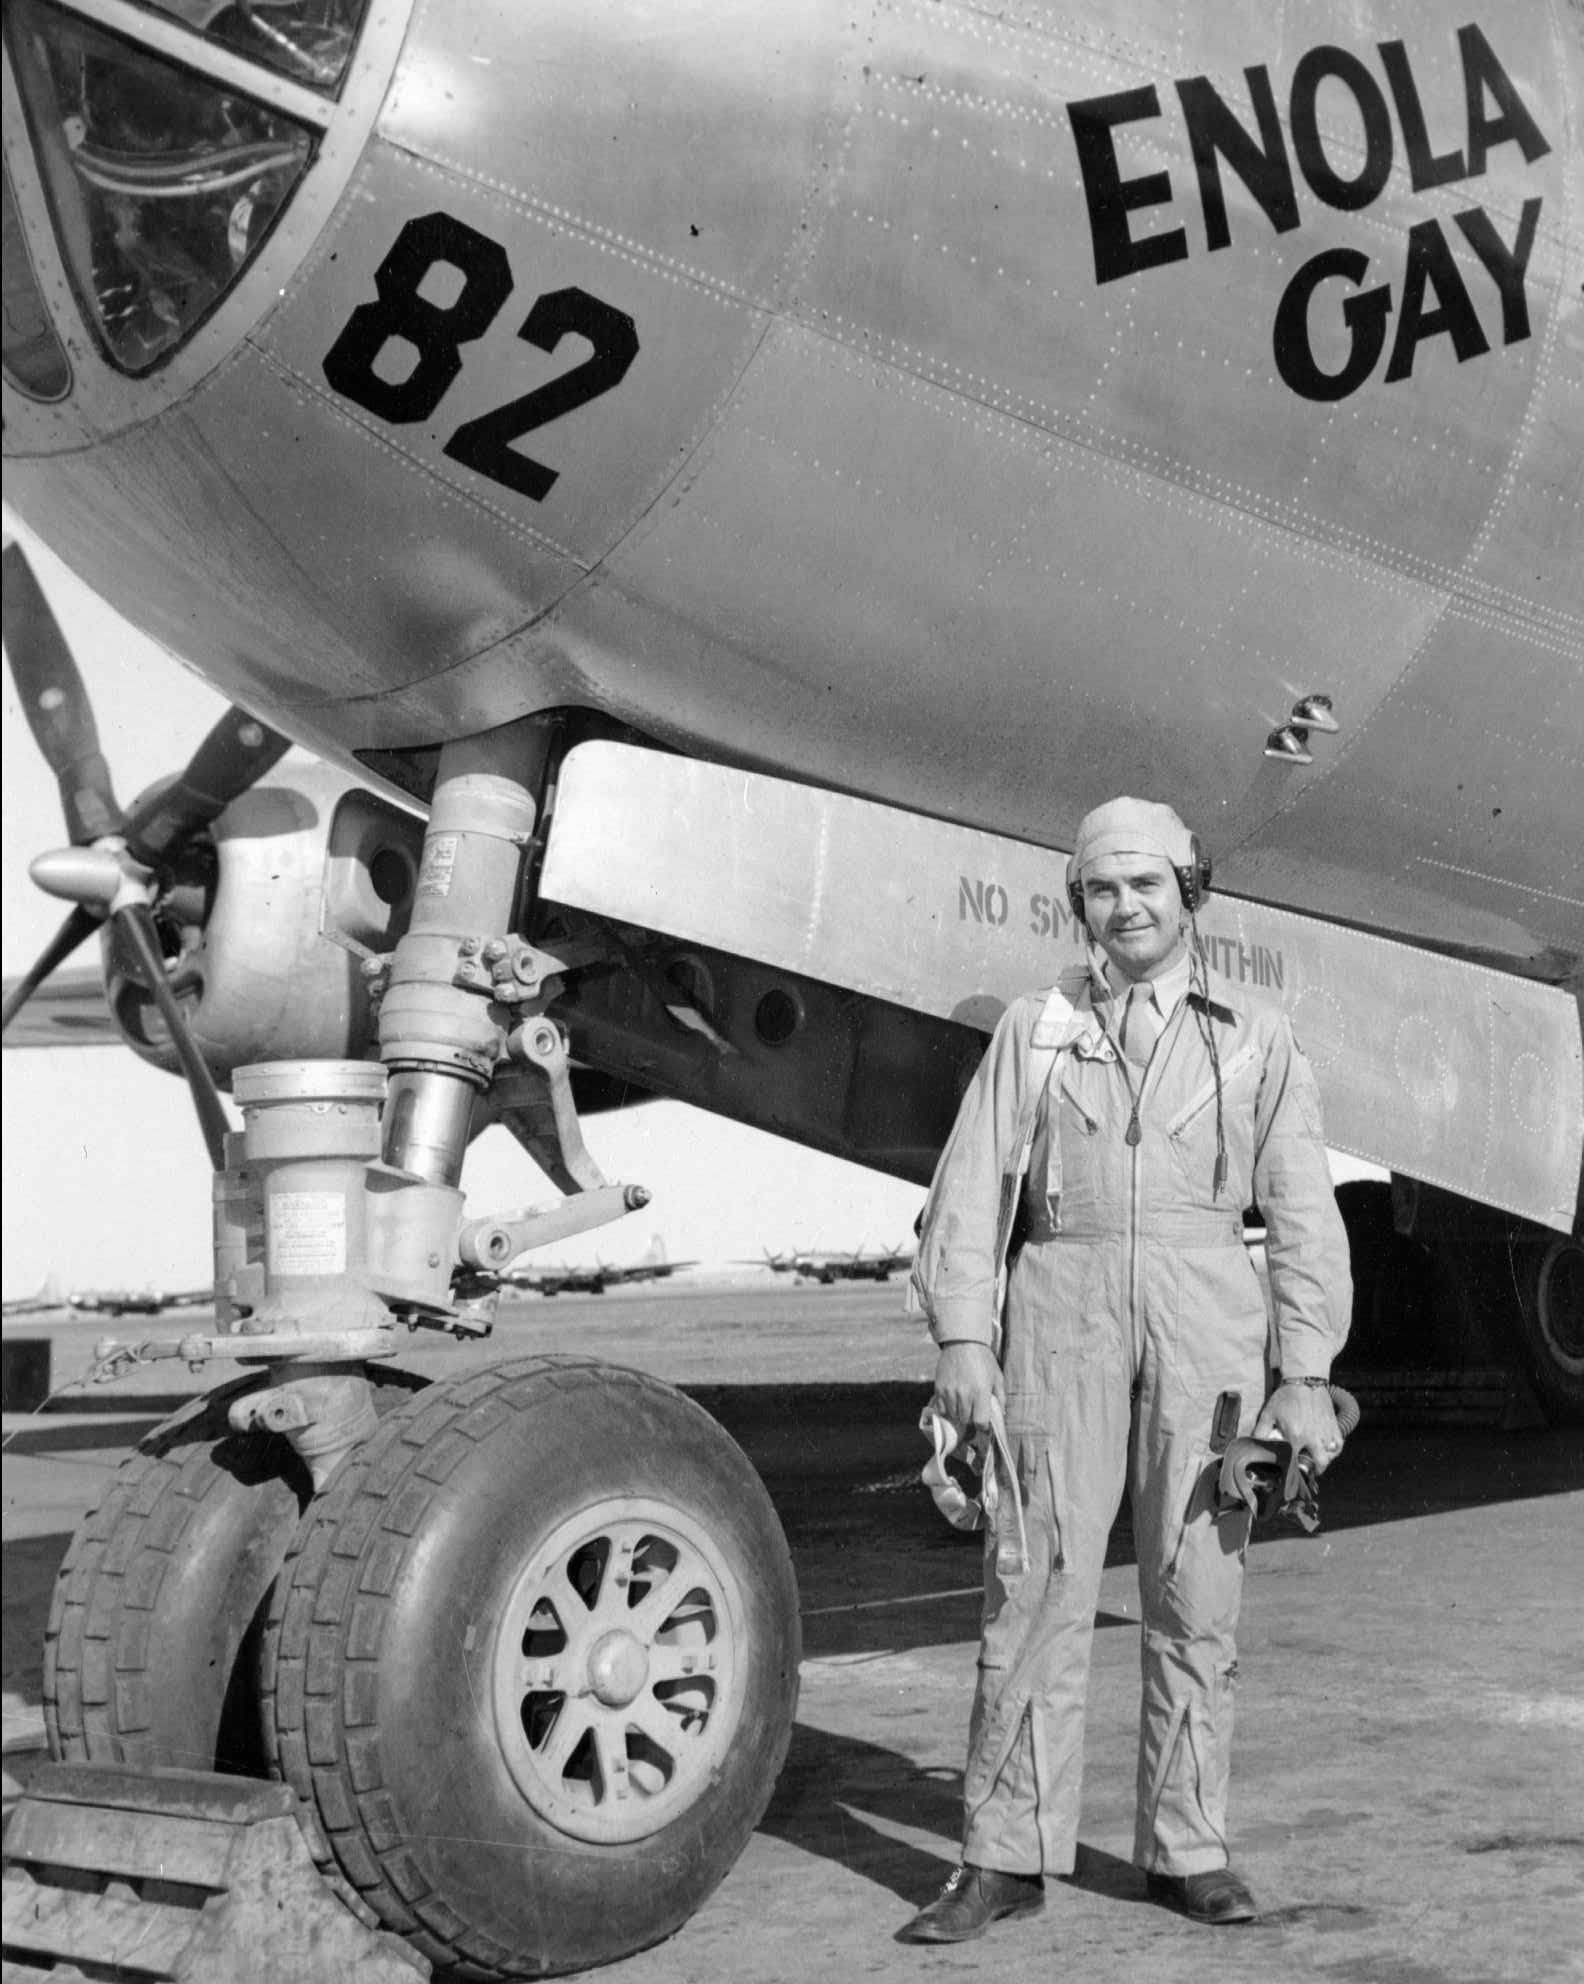 the crew of the enola gay